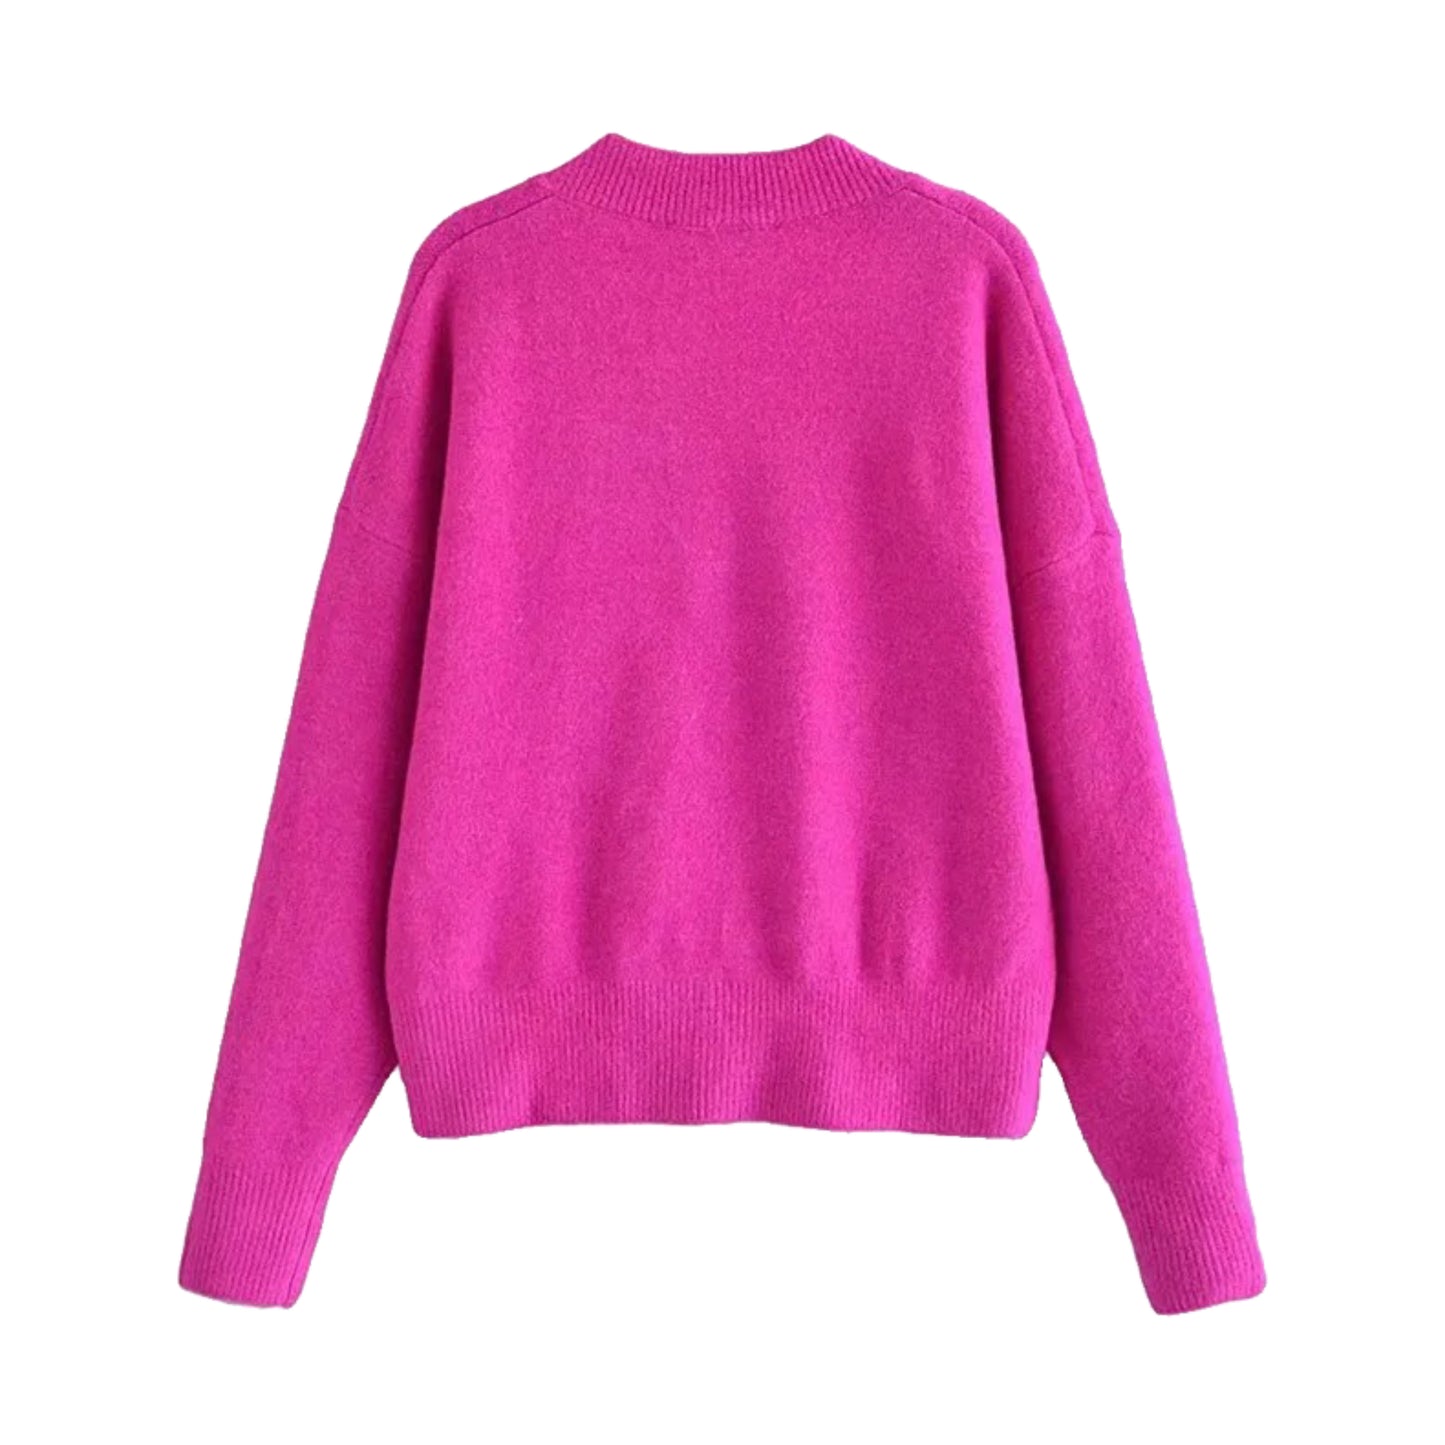 Dark Pink Knit Pull Over Sweater